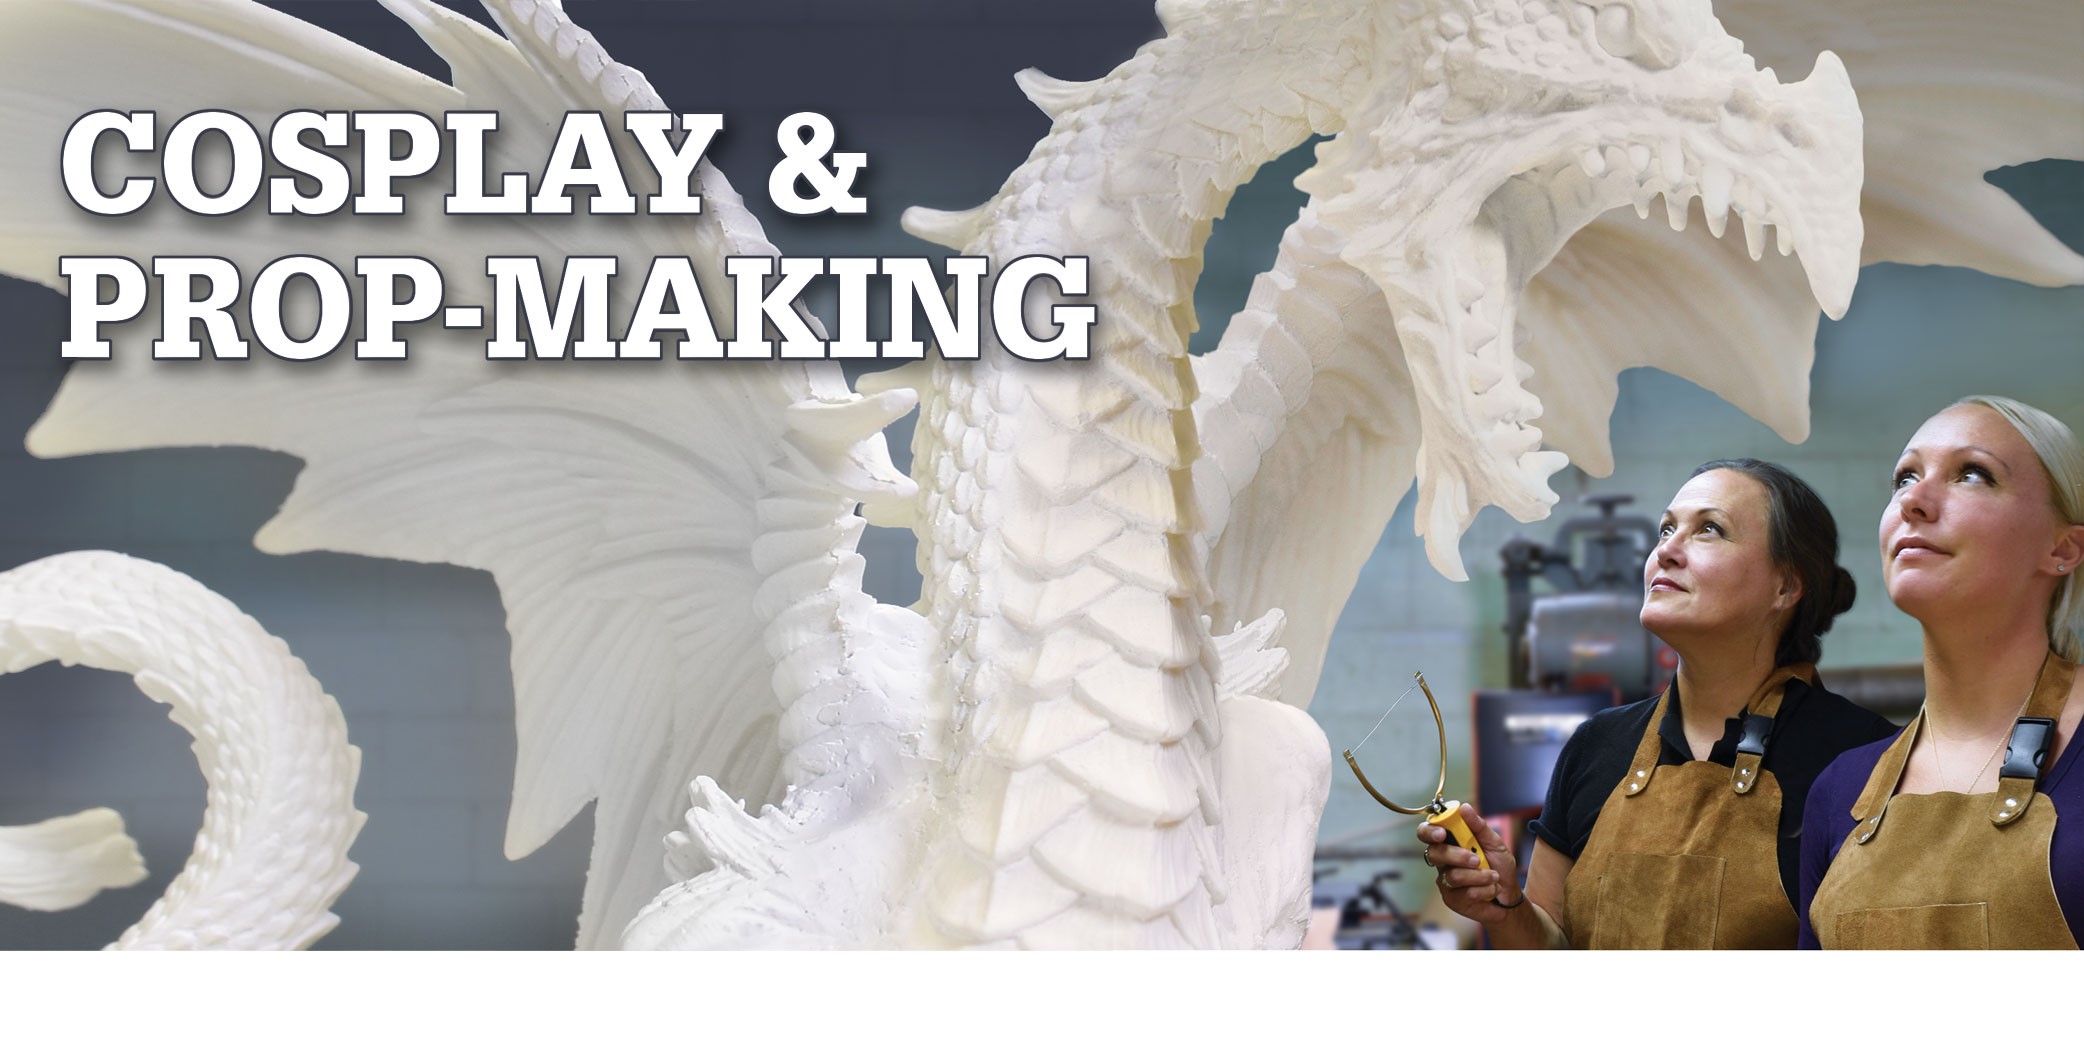 Laser Cutting, 3D Printing, Cosplay and Prop Making